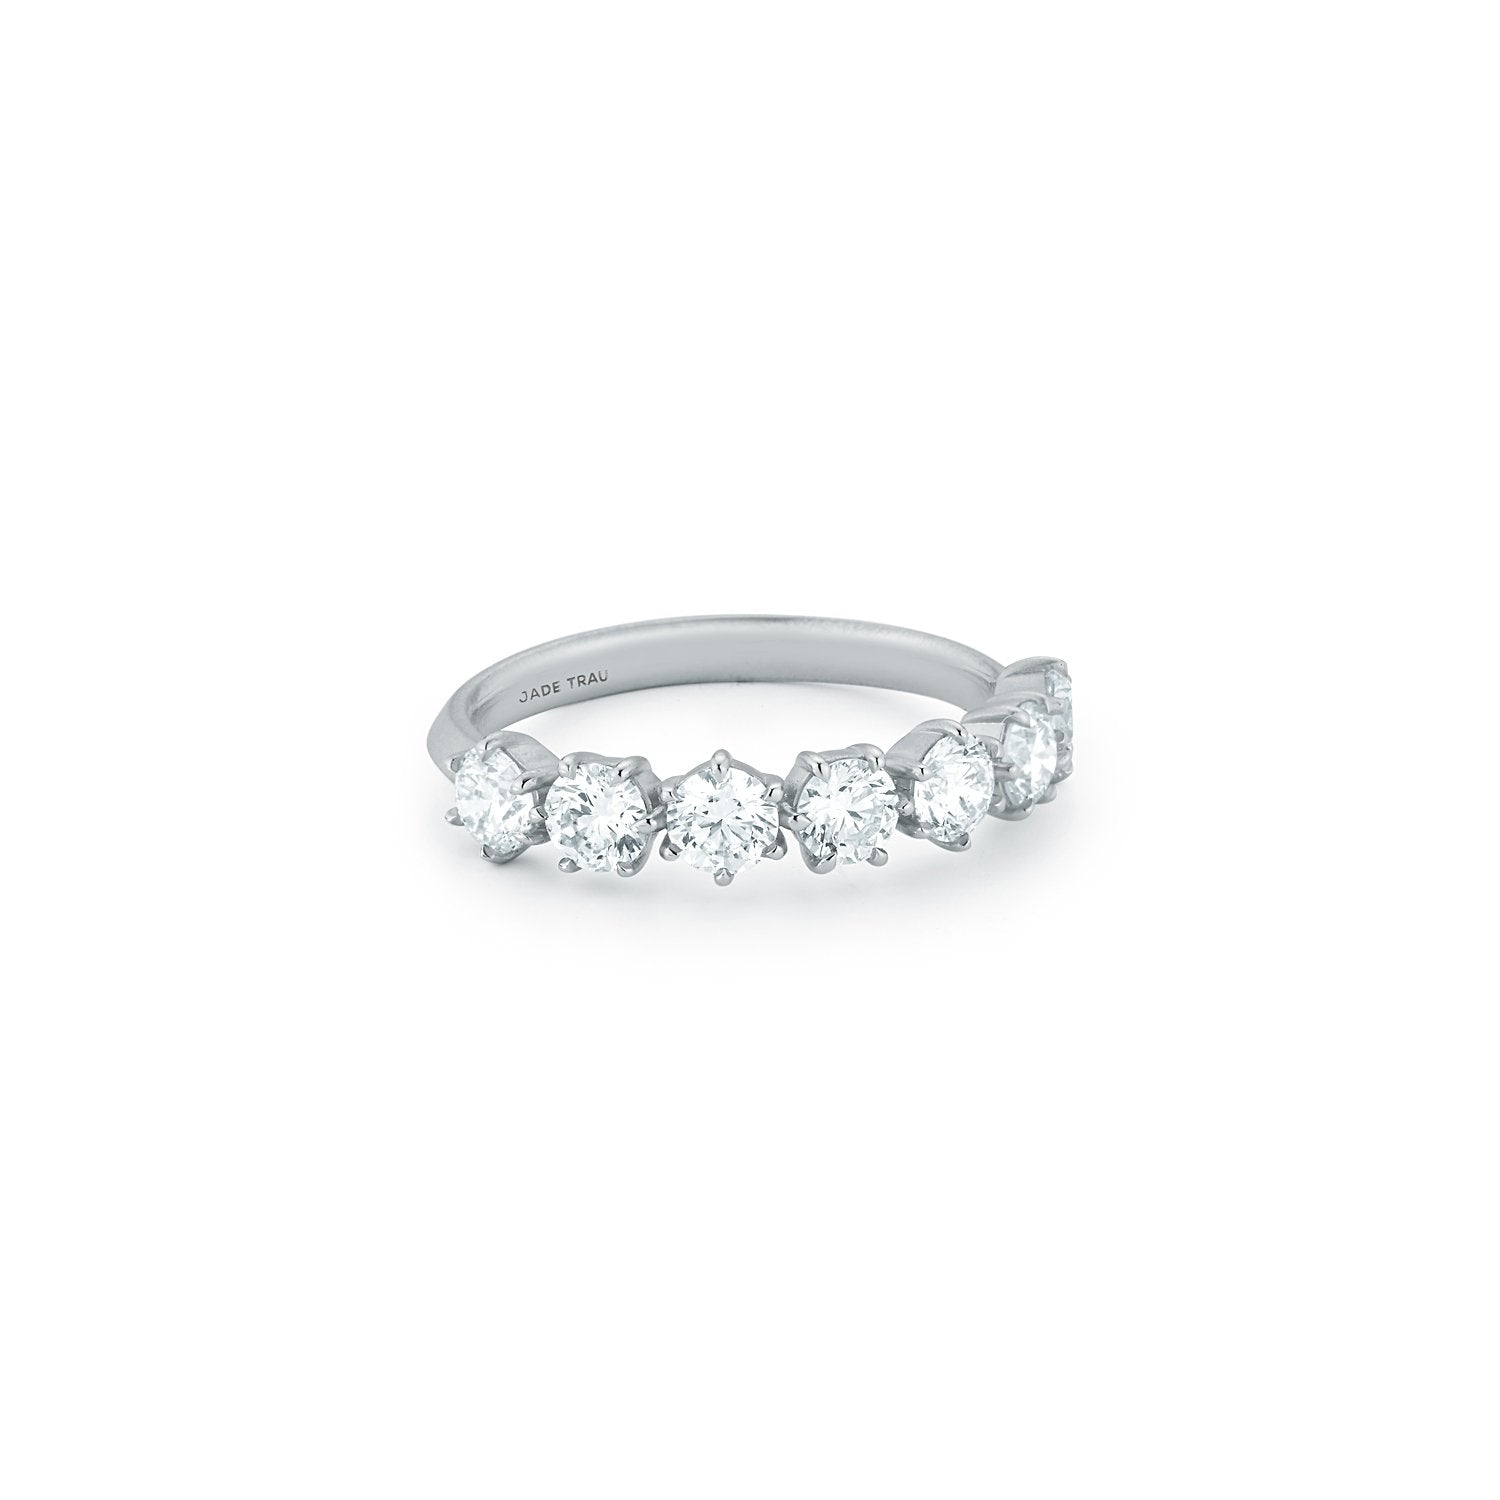 Catherine 1/2 Way Eternity No. 3 in 18K White Gold